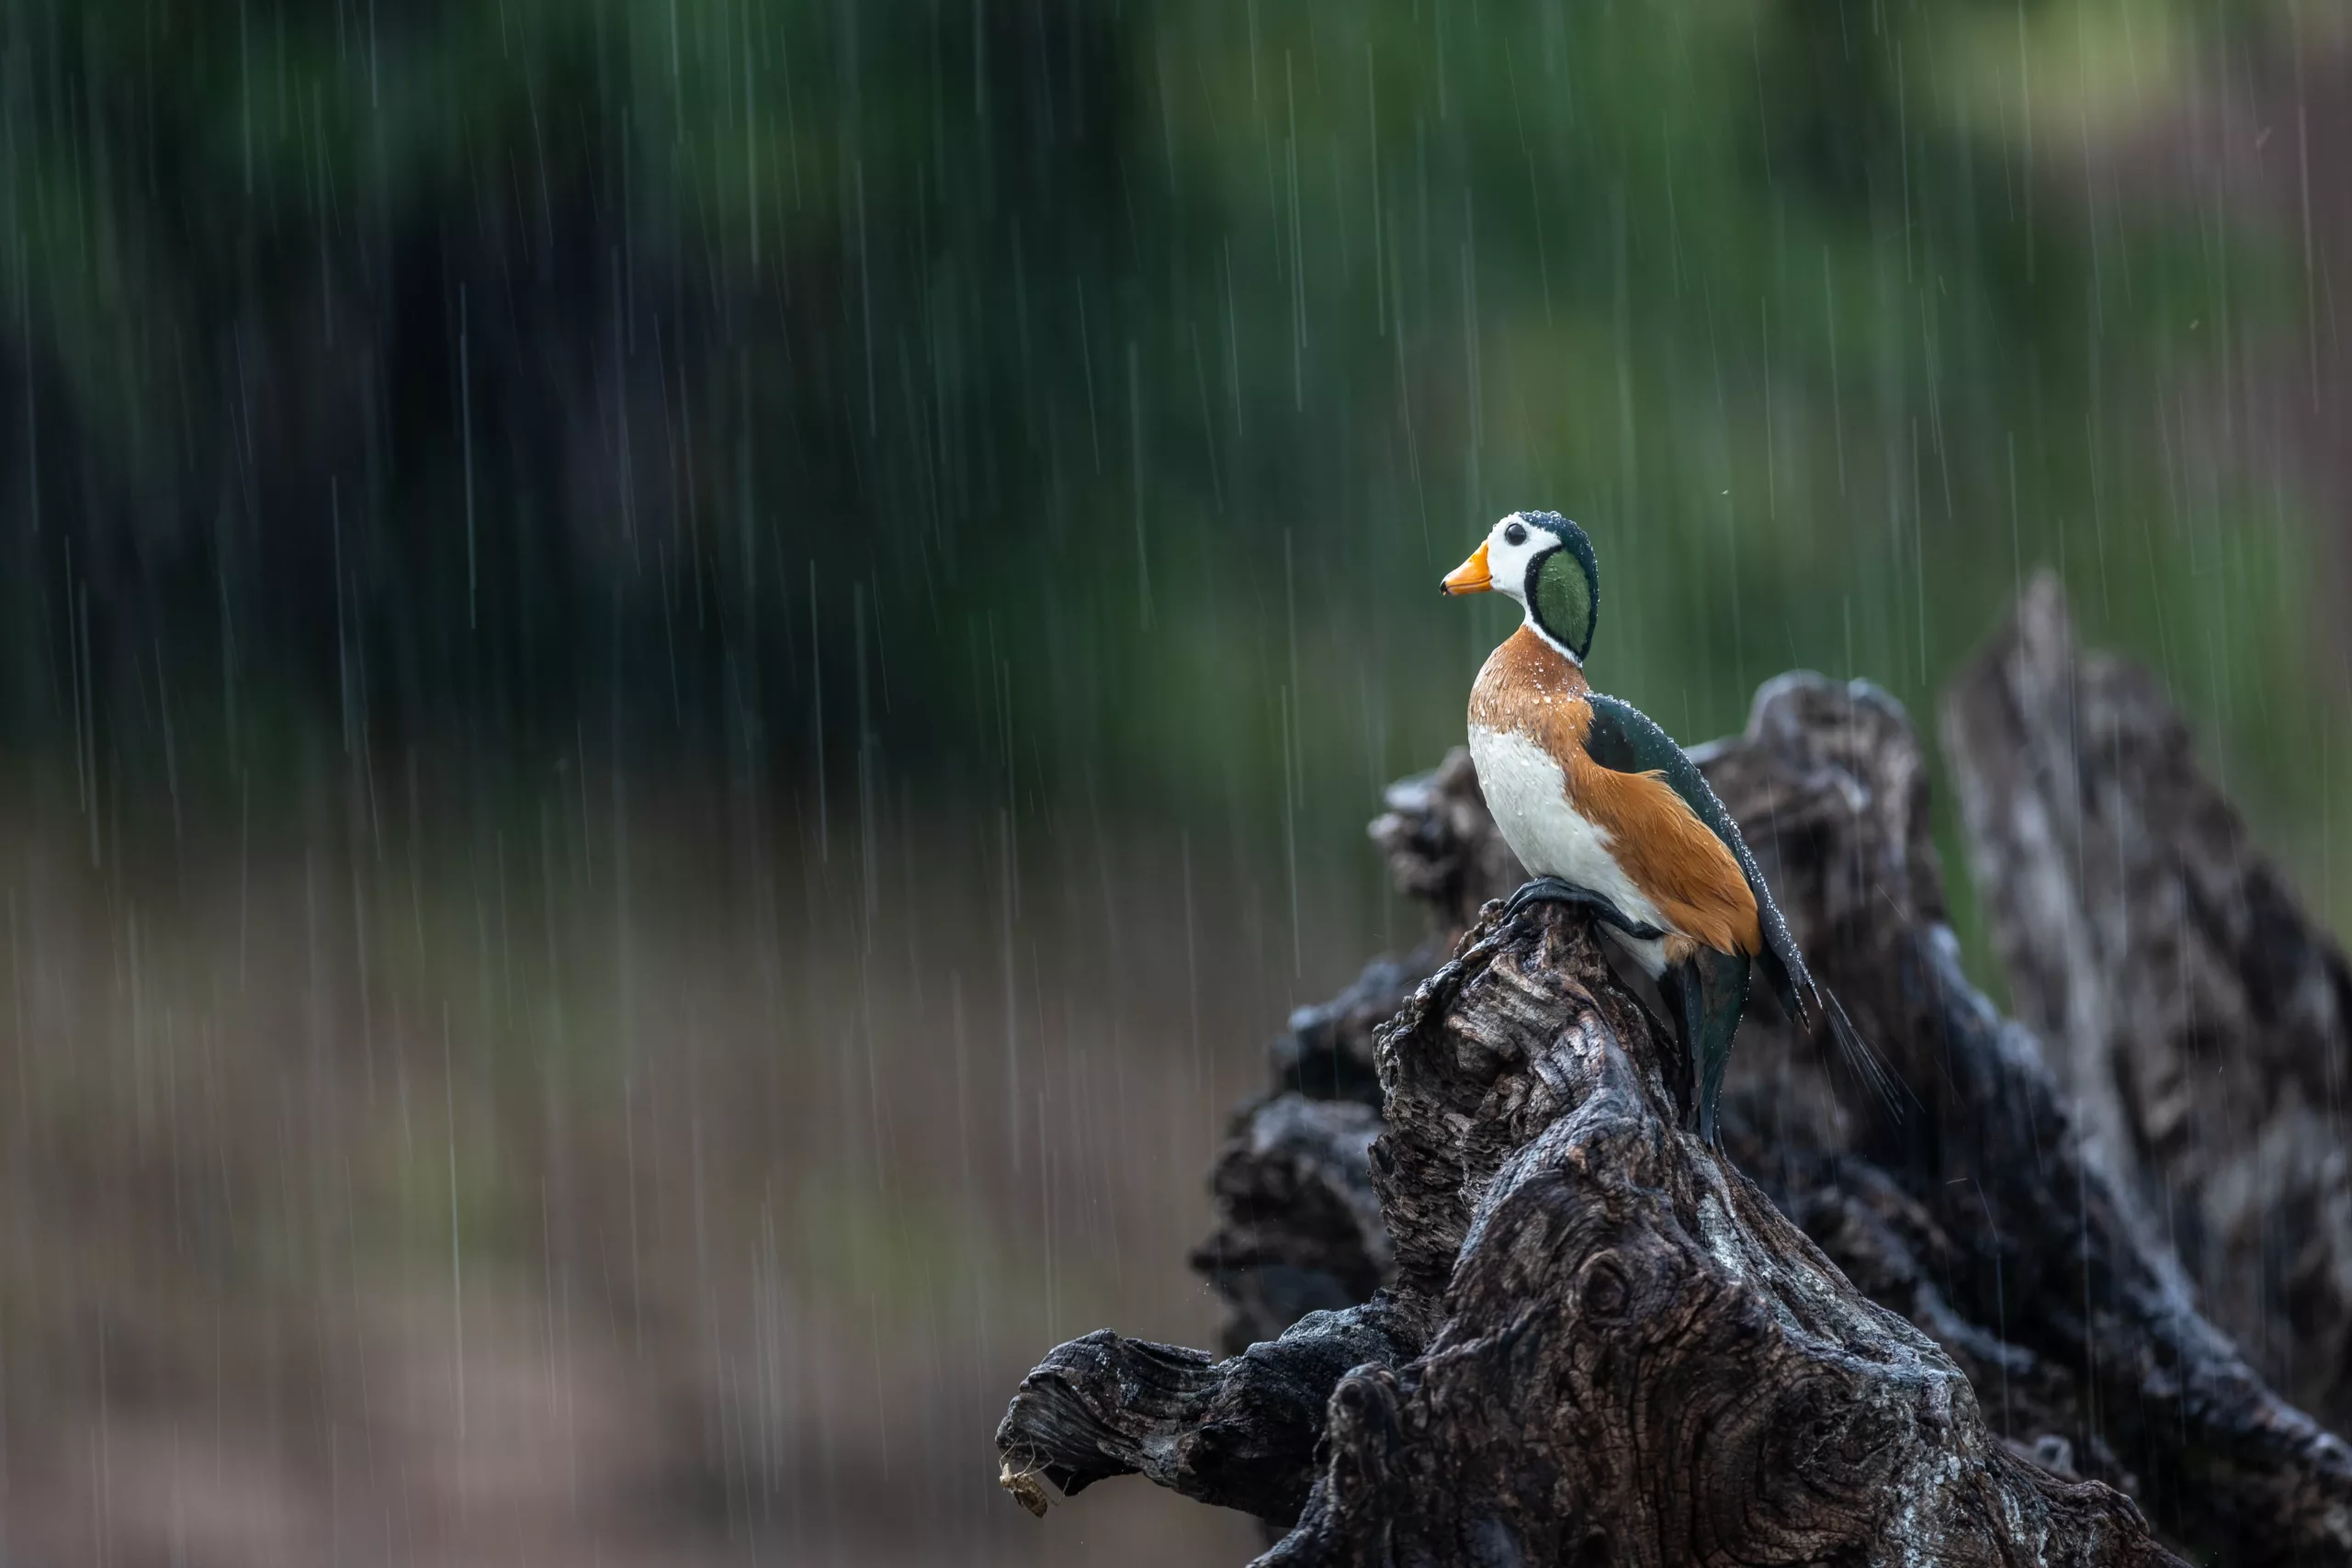 pygmy goose in rain by sabine stols